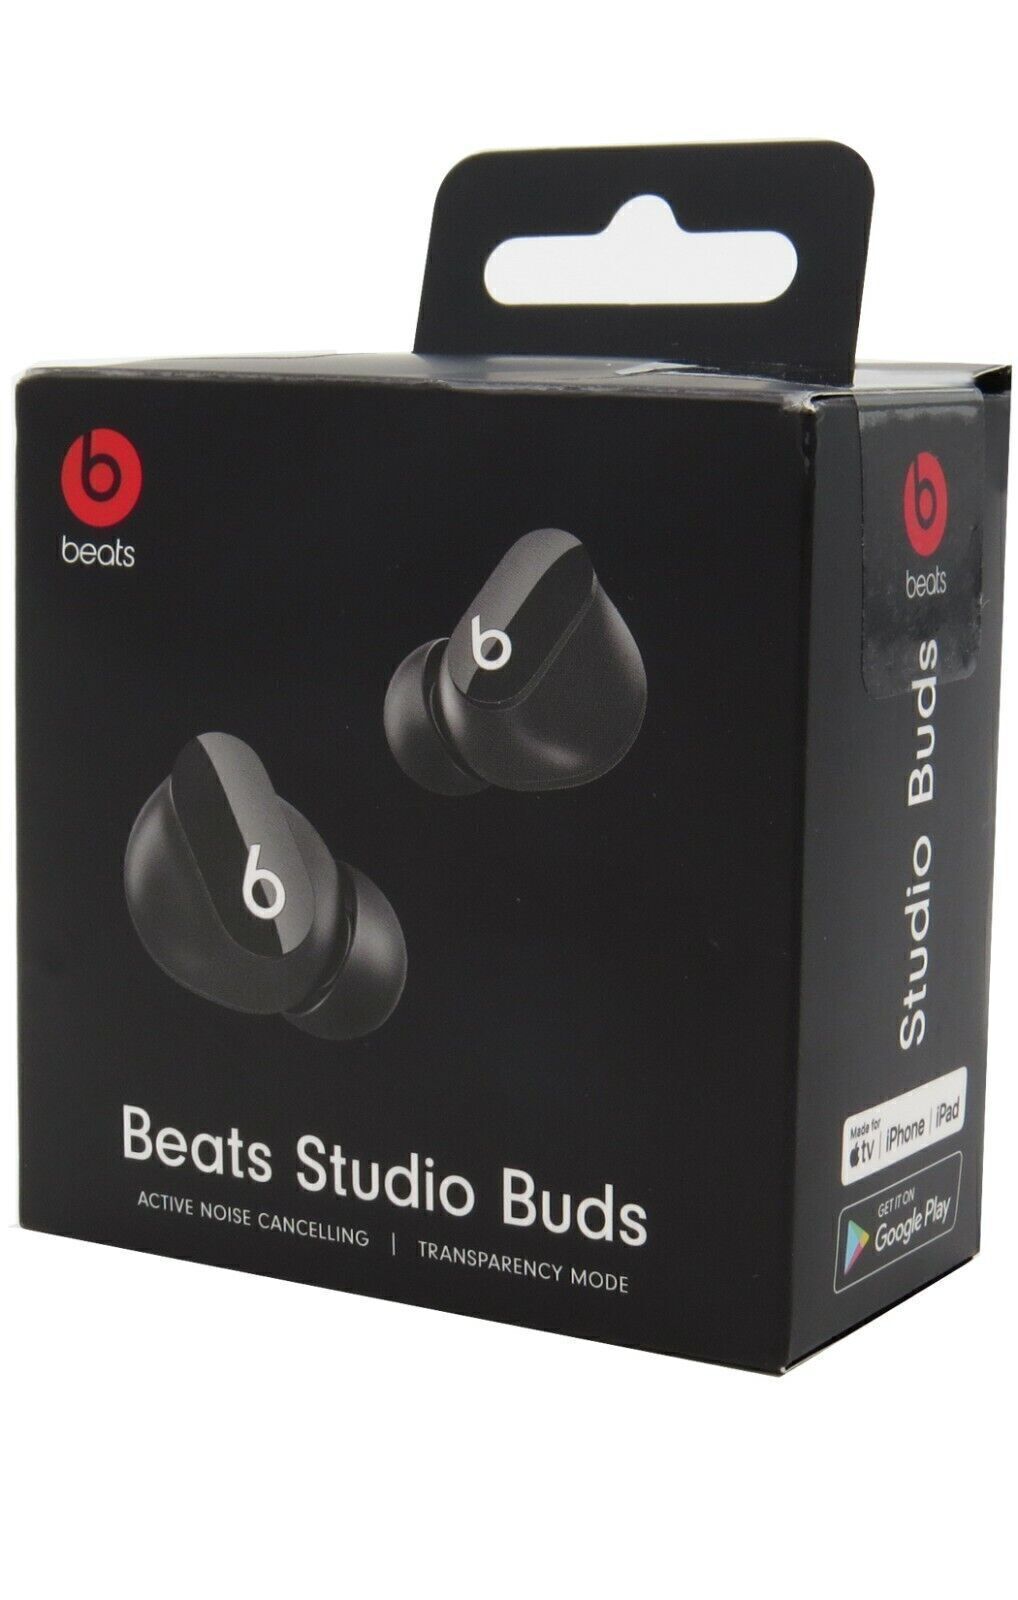 Beats by Dr. Dre Beats Studio Buds Wireless RETAIL BOX & ORIGINAL CHARGING CABLE